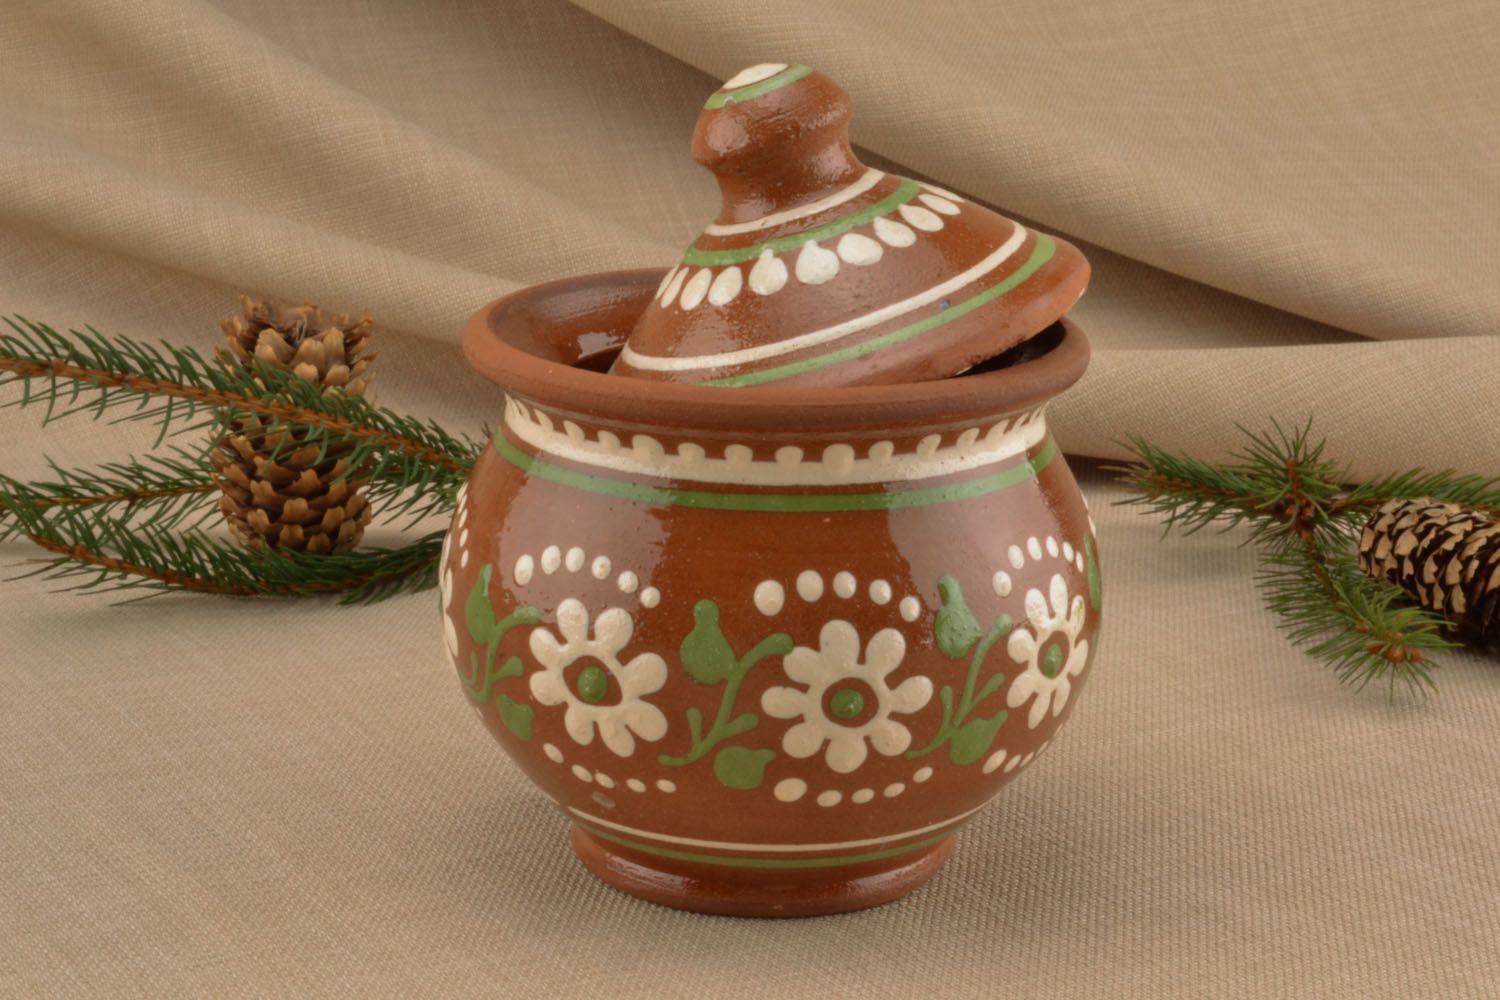 3,5 inches tall cooking ceramic pot with a lid in ethnic style and floral pattern 1 lb photo 1